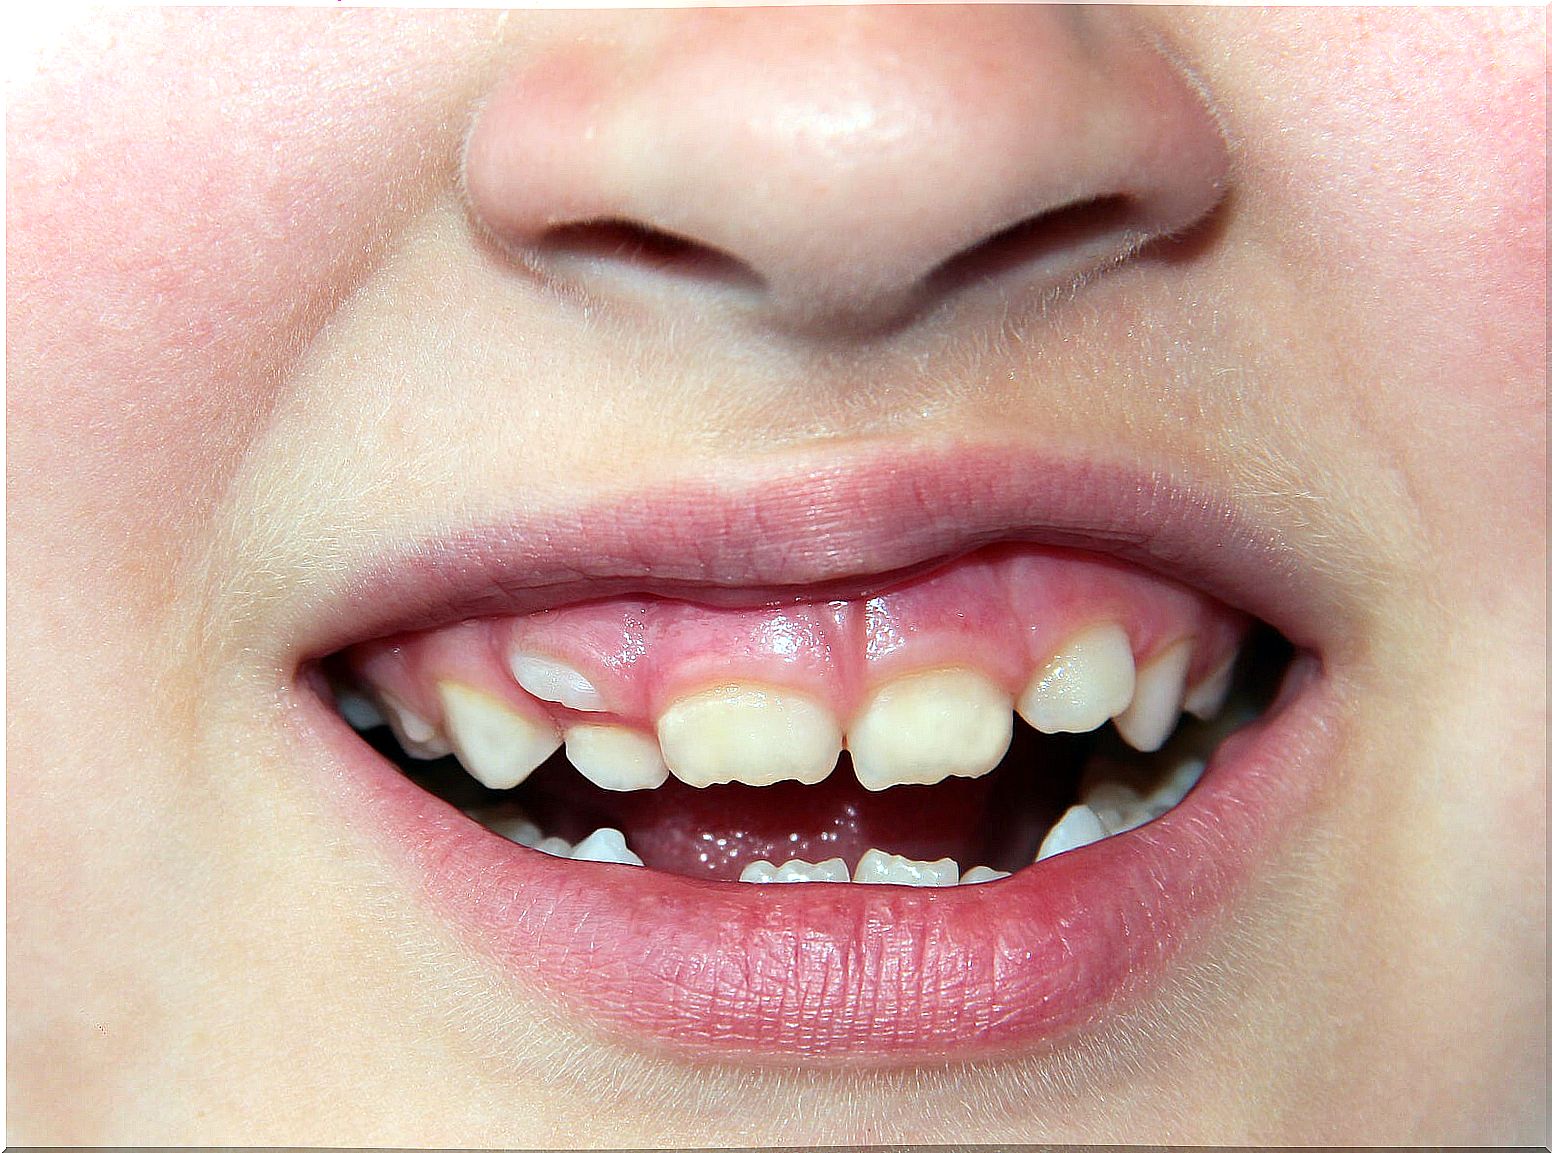 Dental crowding in children: how is it corrected?